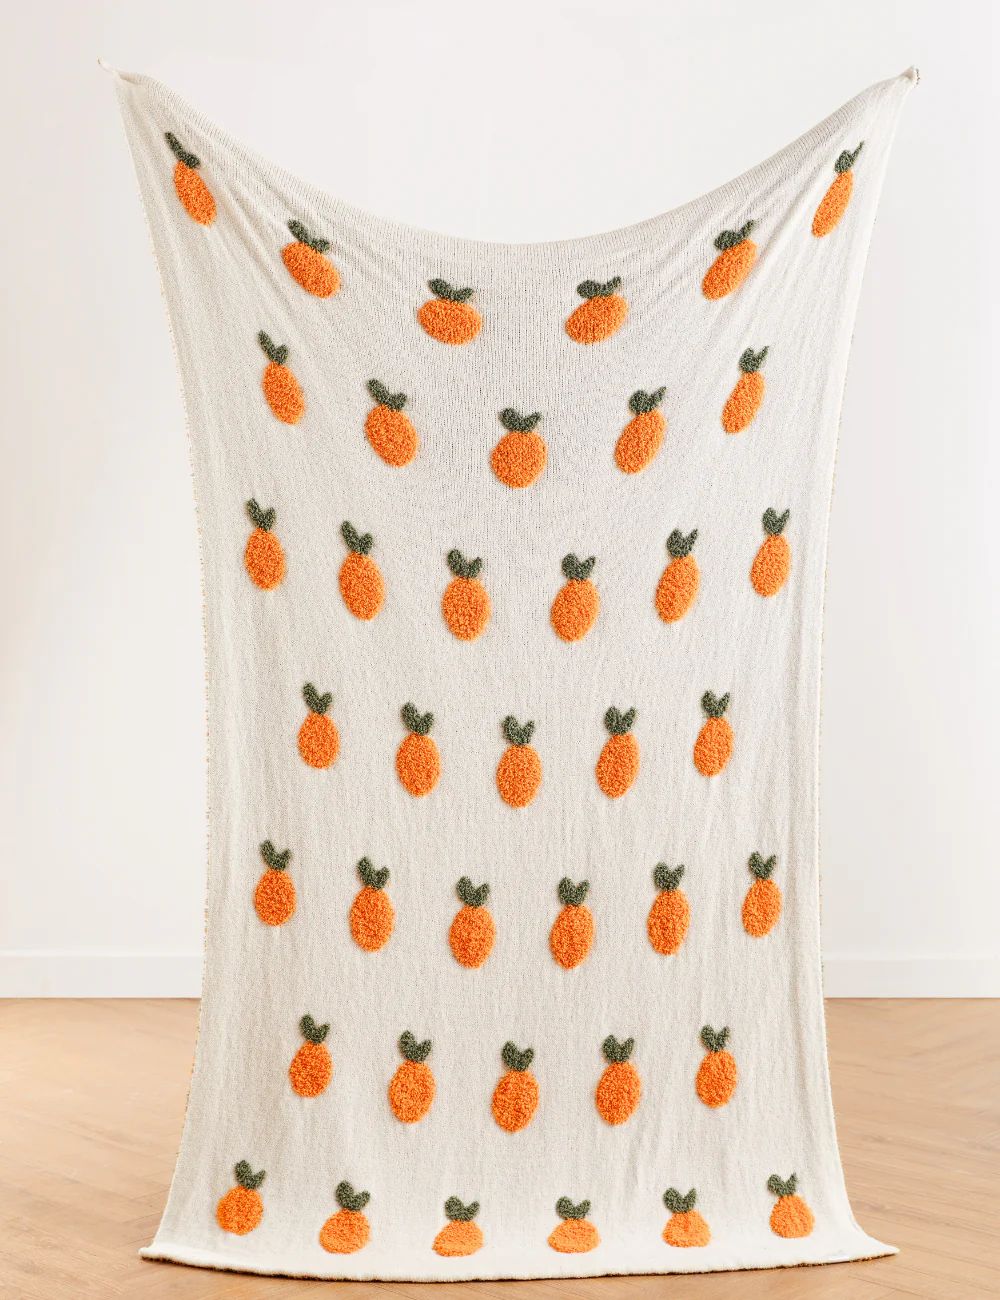 Oranges Buttery Blanket- Full Size Pre Order Feb 15th | The Styled Collection